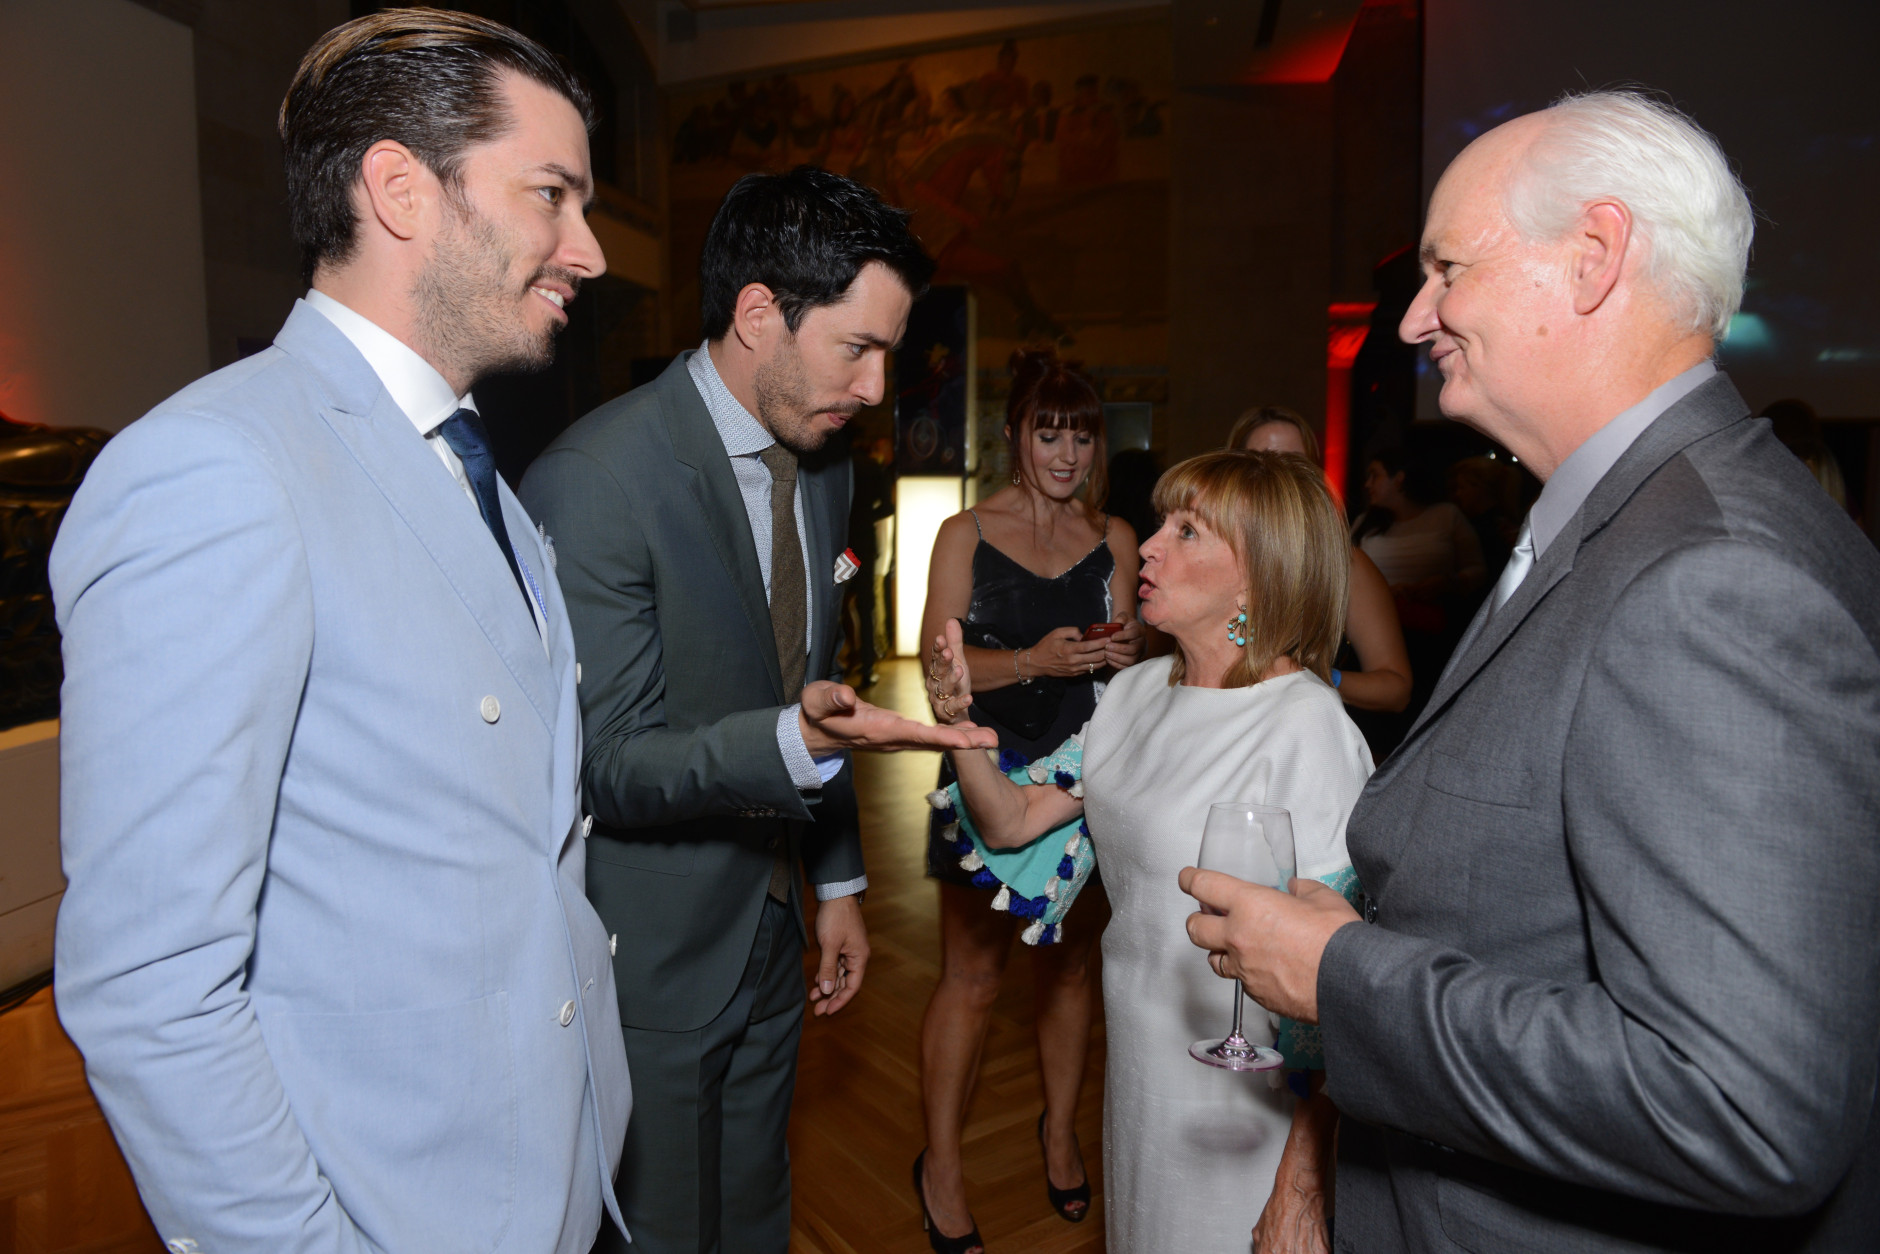 Jonathan Scott and, from left, Drew Scott,  Debra McGrath and Colin Mochrie attend the Producers Ball at the Royal Ontario Museum on Wednesday, Sept. 3, 2014, in Toronto. (Photo by Arthur Mola/Invision for Producers Ball/AP Images)